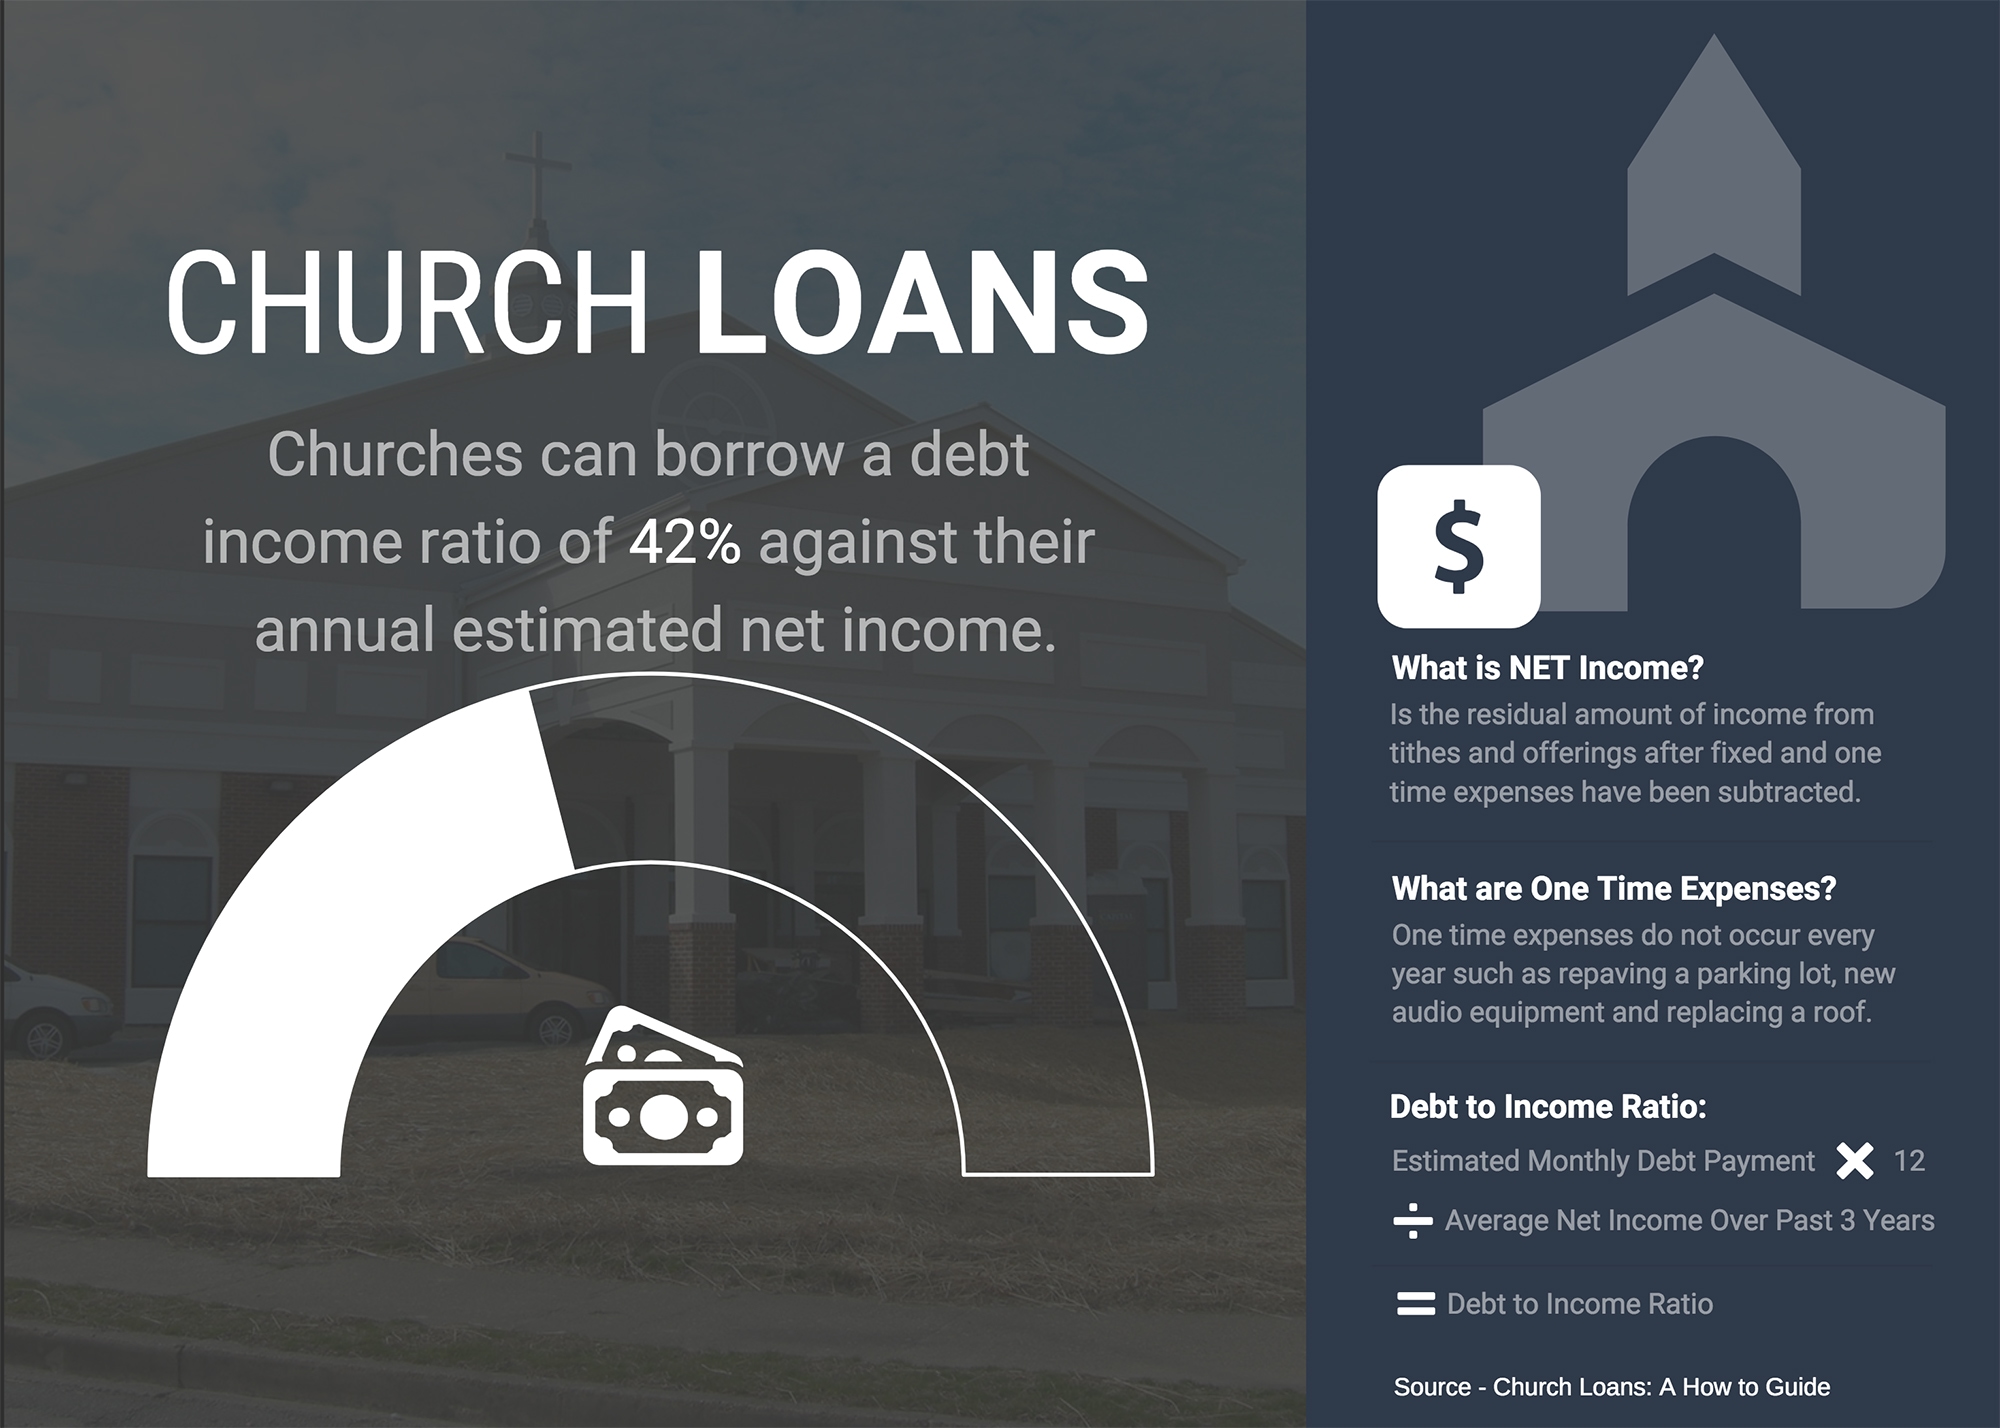 Debt Income Ratio for Church Loans